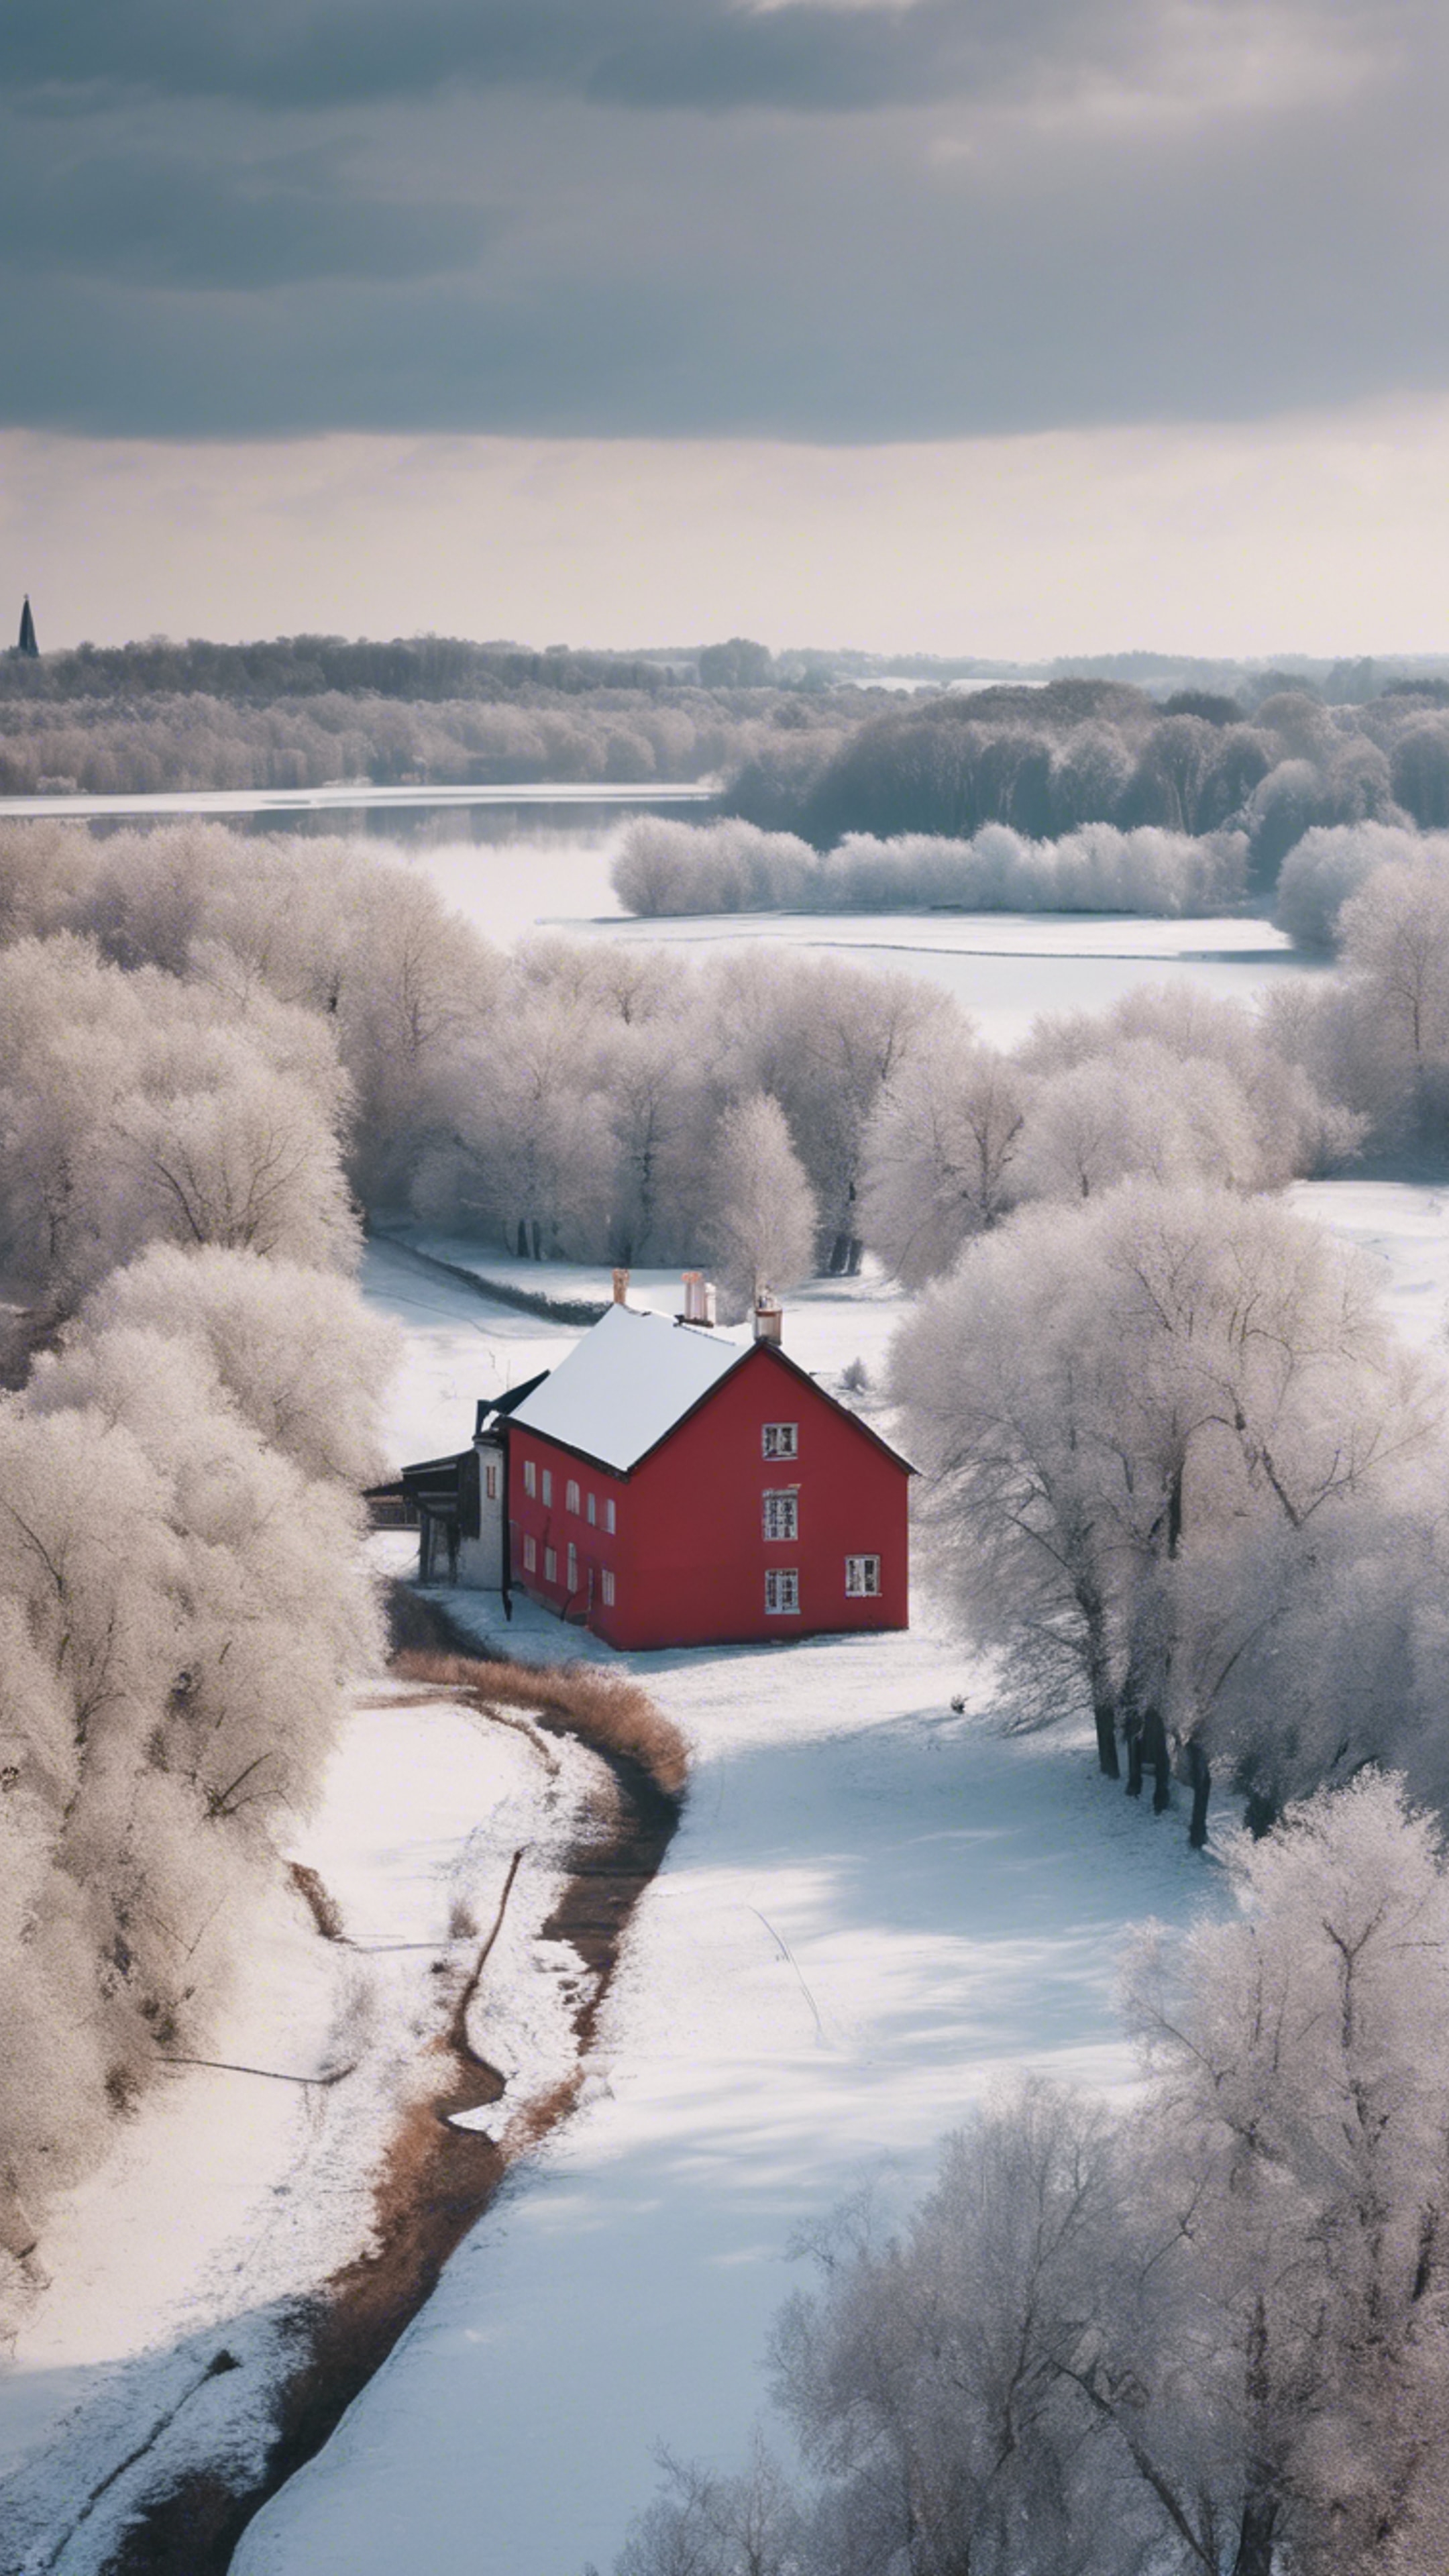 A snow-covered French country landscape with bare trees, a frozen river, and a small red-roofed house in the distance. Ფონი[86a496d4055745a5962e]